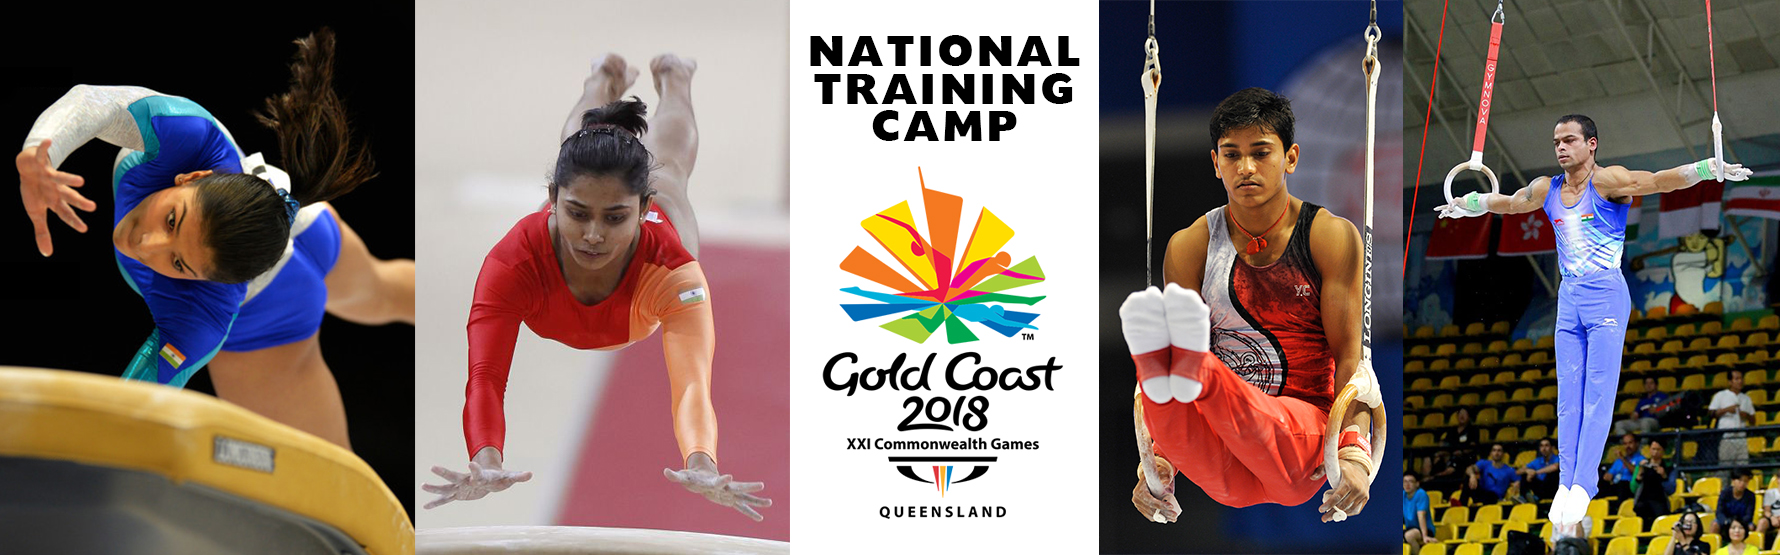 National Training Camp for CWG 2018